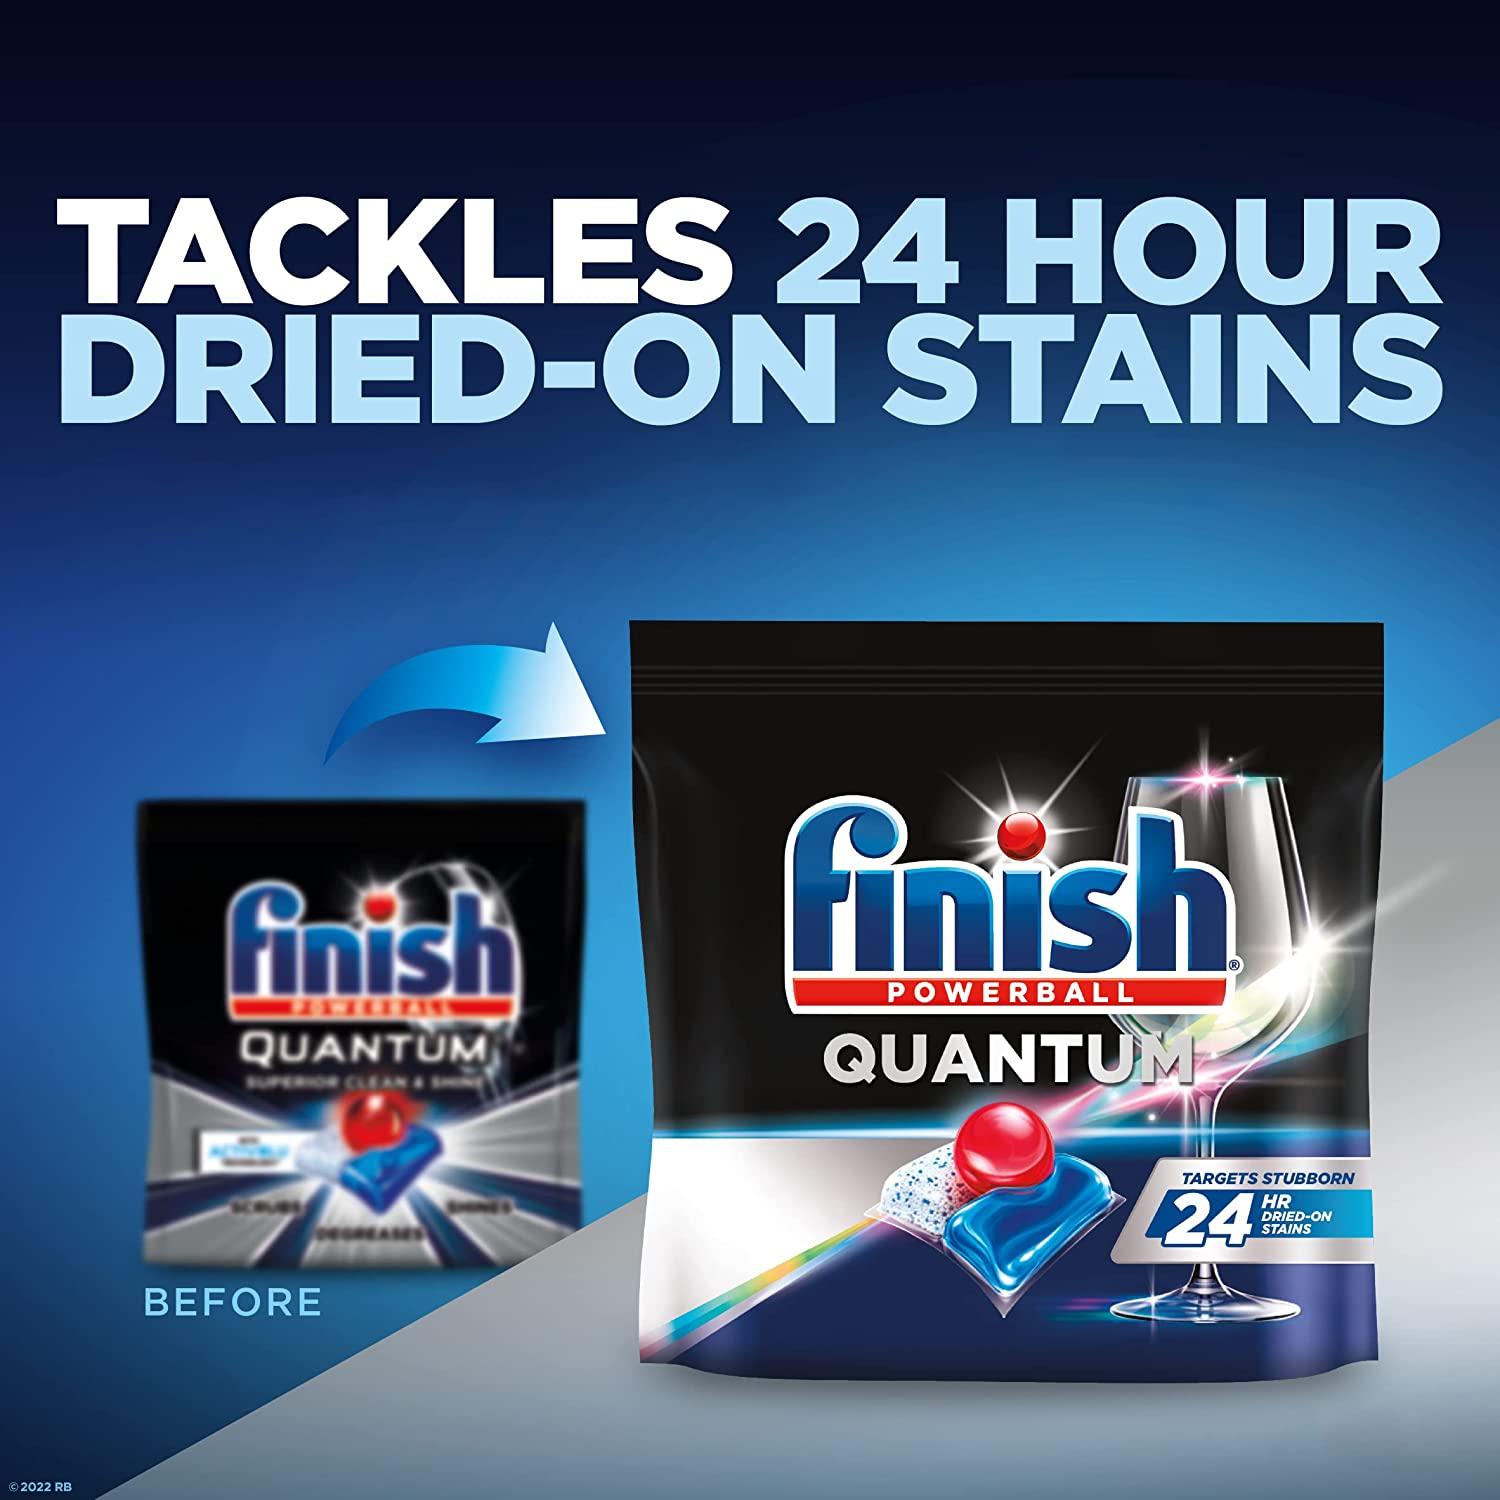 Finish - Quantum - 82Ct - Dishwasher Detergent - Powerball - Ultimate Clean  & Shine - Dishwashing Tablets - Dish Tabs (Packaging May Vary) 